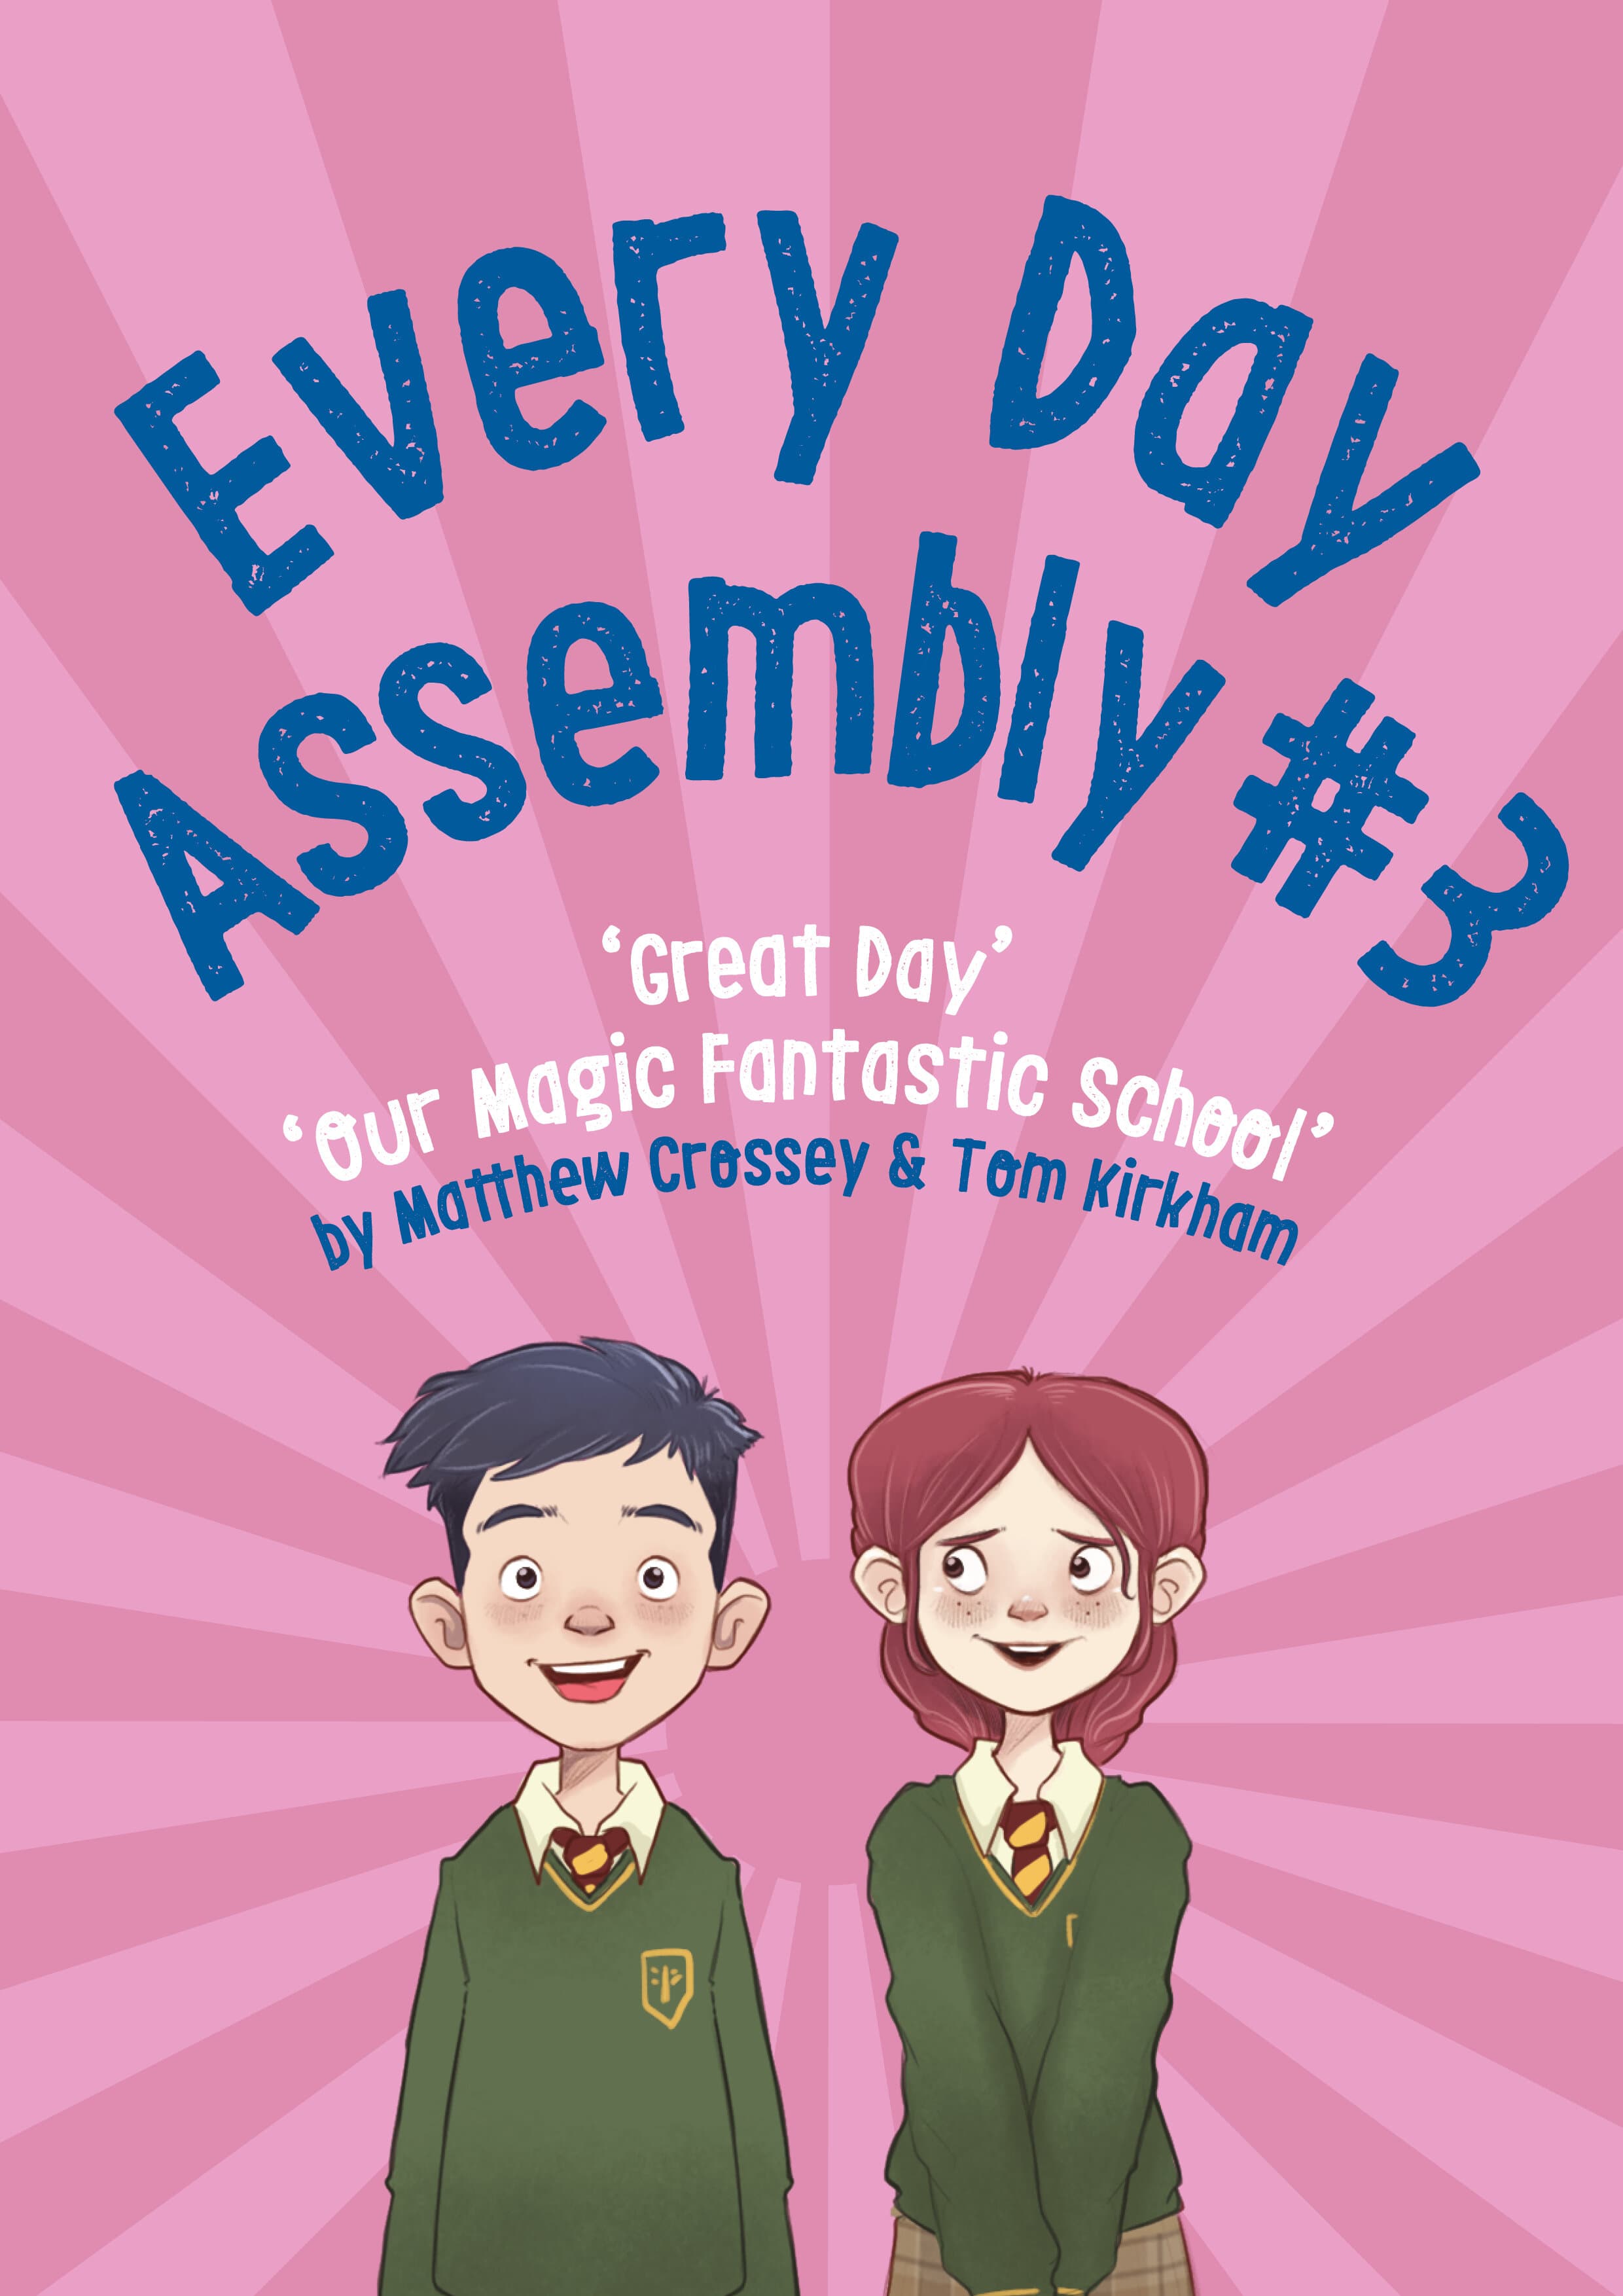 Every Day Assembly 3 Song Download Pack - 100% Discount With Code EVDAY3